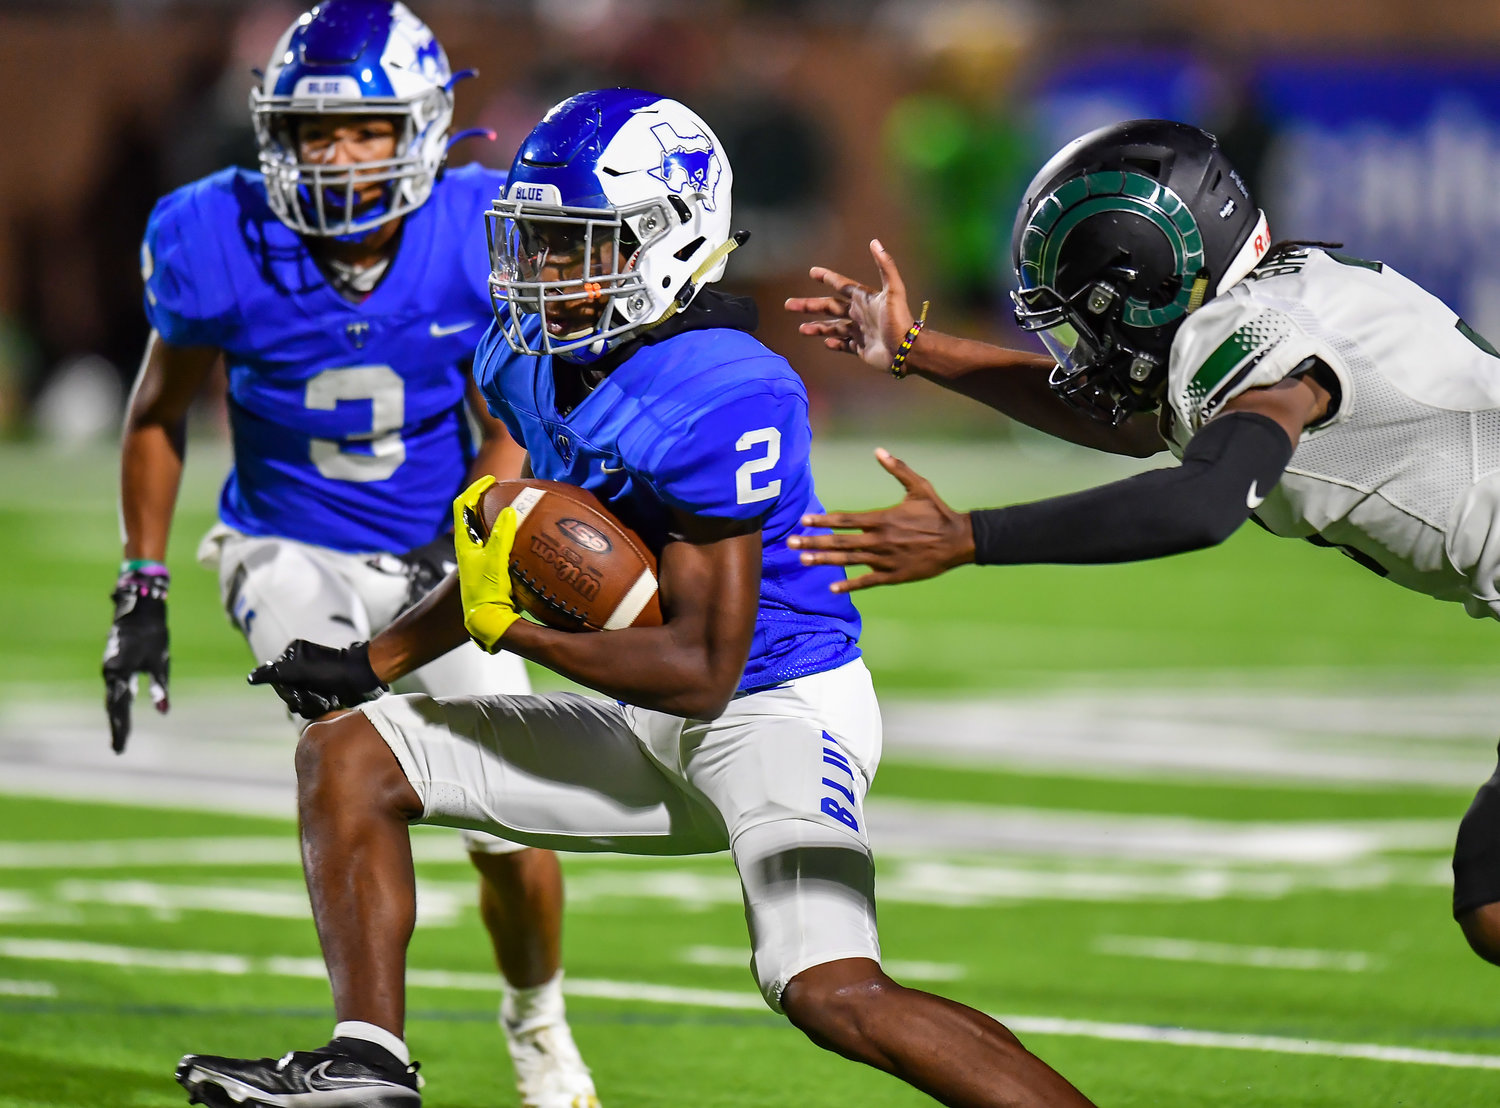 Katy, Tx. Oct 15, 2021:  Katy Taylors Michael Whitaker iii #2 rushes up the middle avoiding a tackle during a conference game between Mayde Creek and Katy Taylor at Rhodes Stadium. (Photo by Mark Goodman / Katy Times)